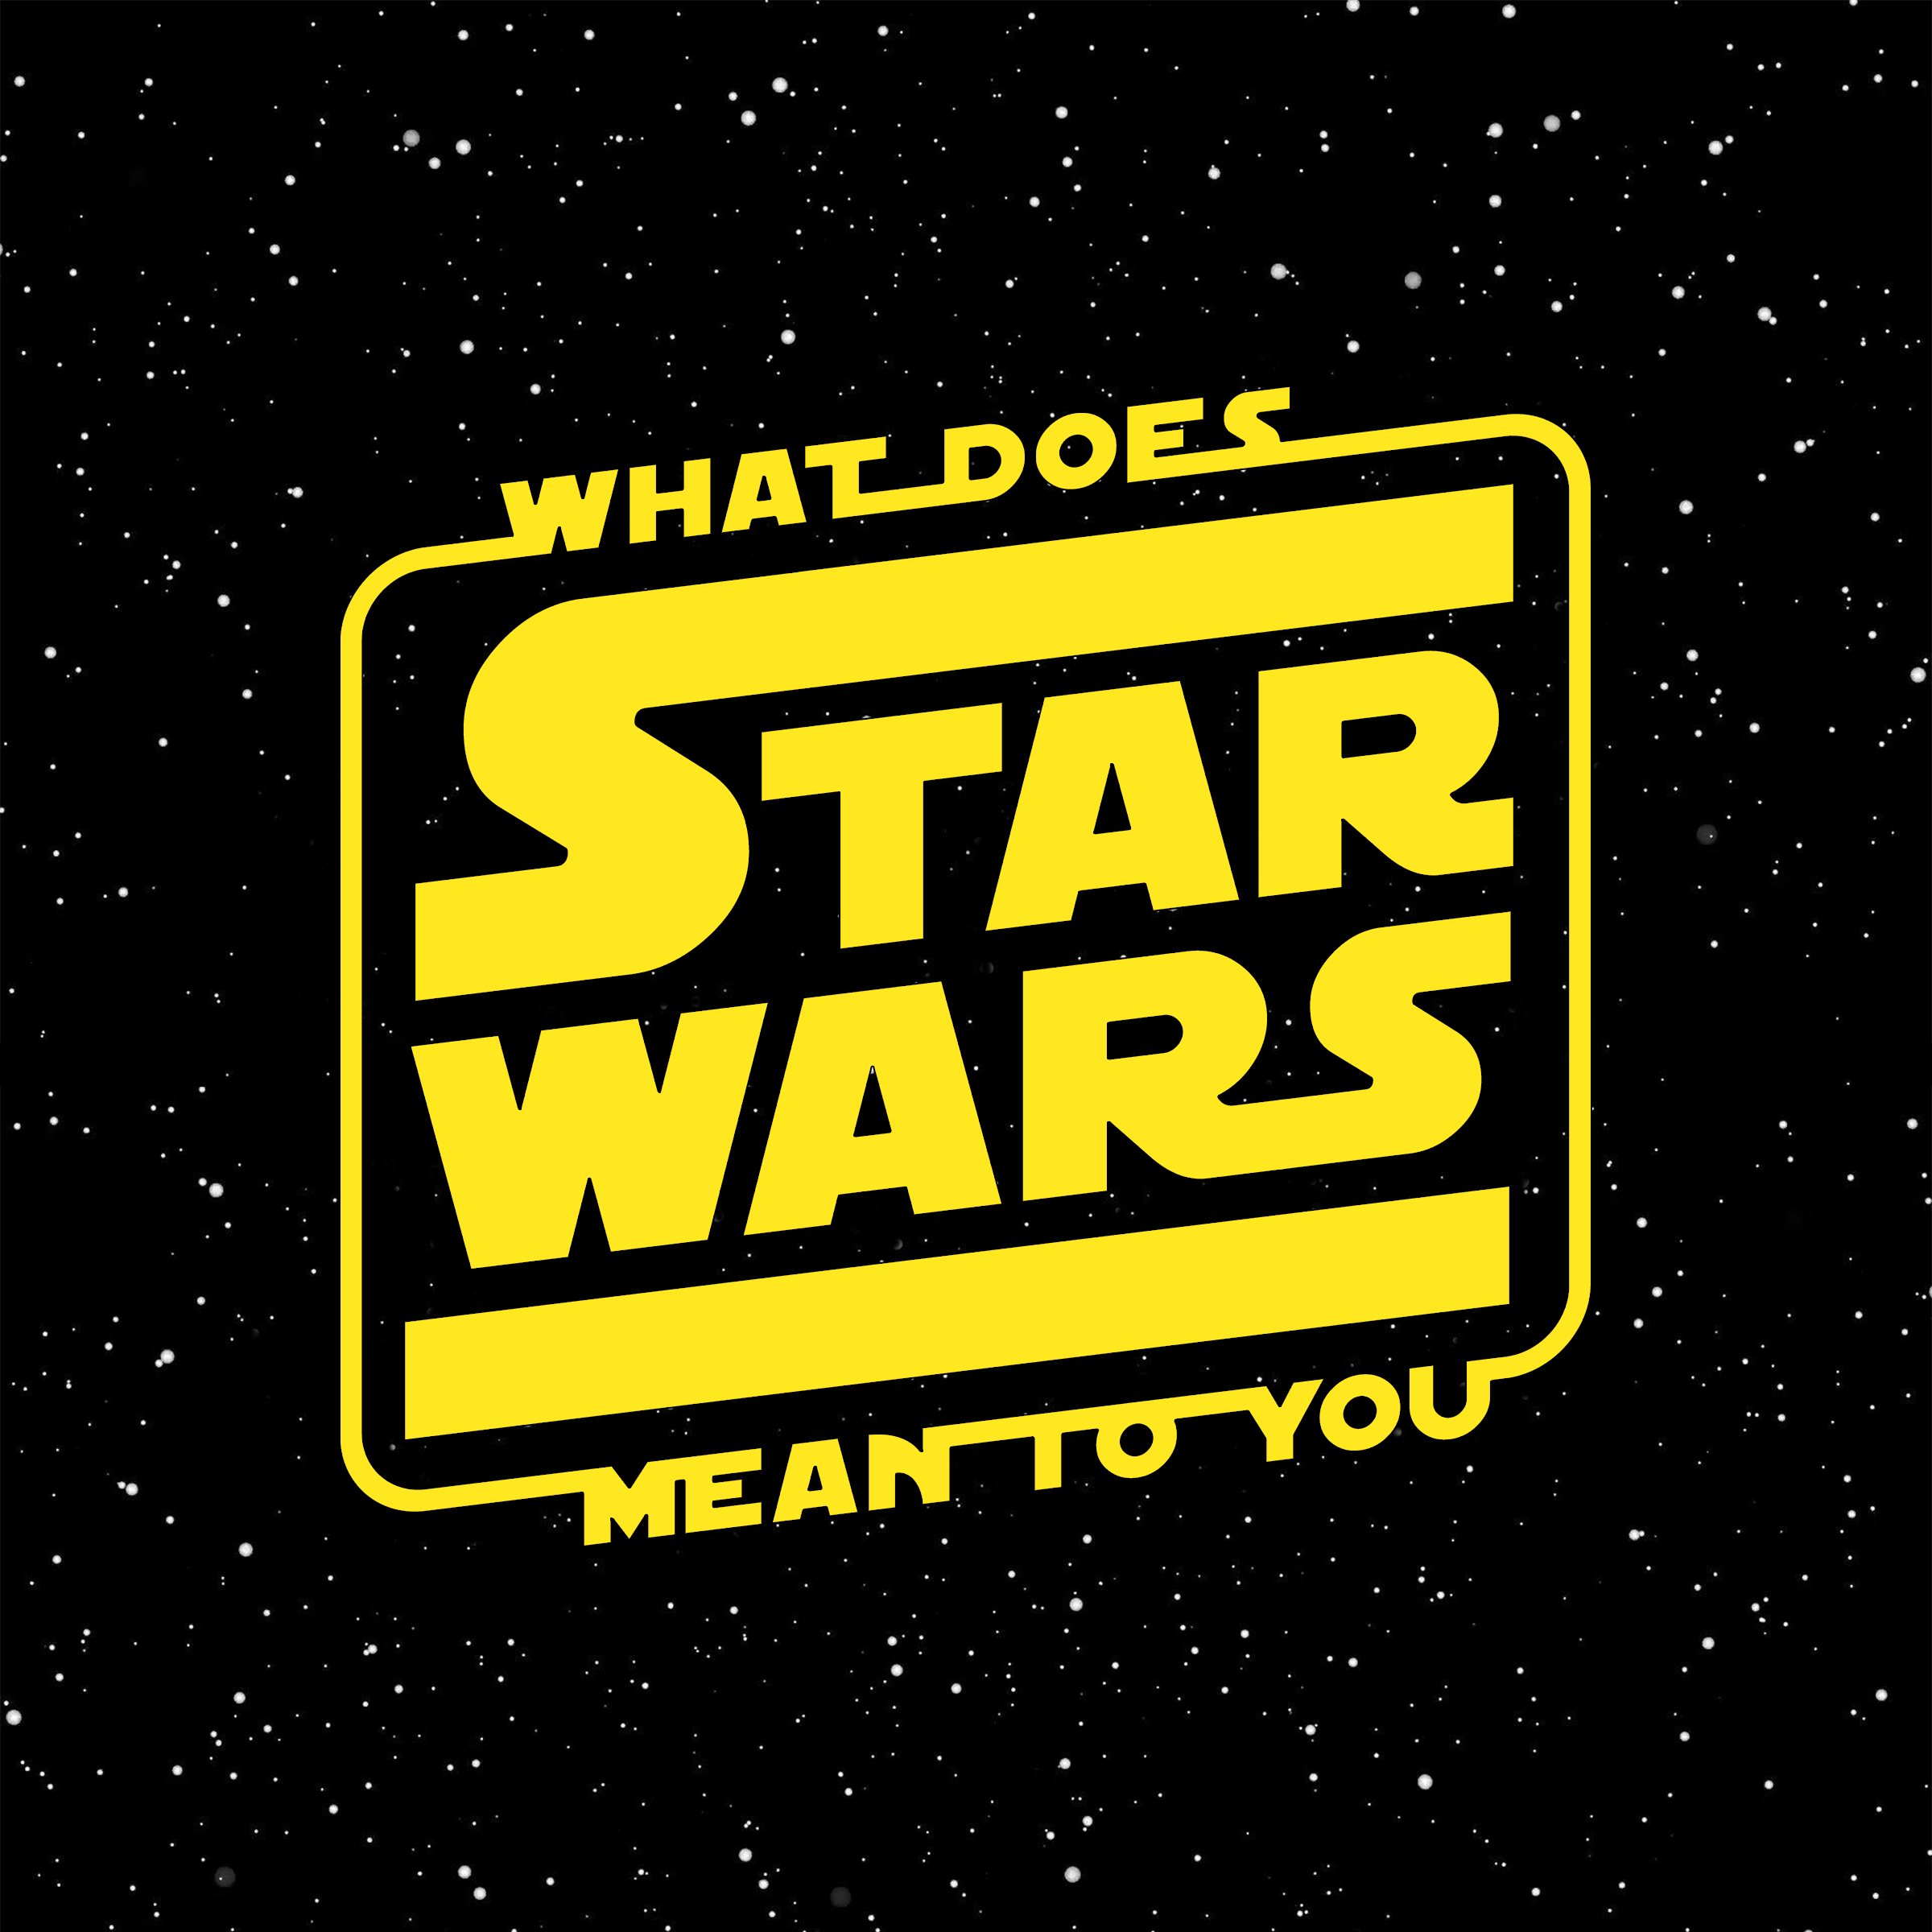 What Does Star Wars Mean To You?